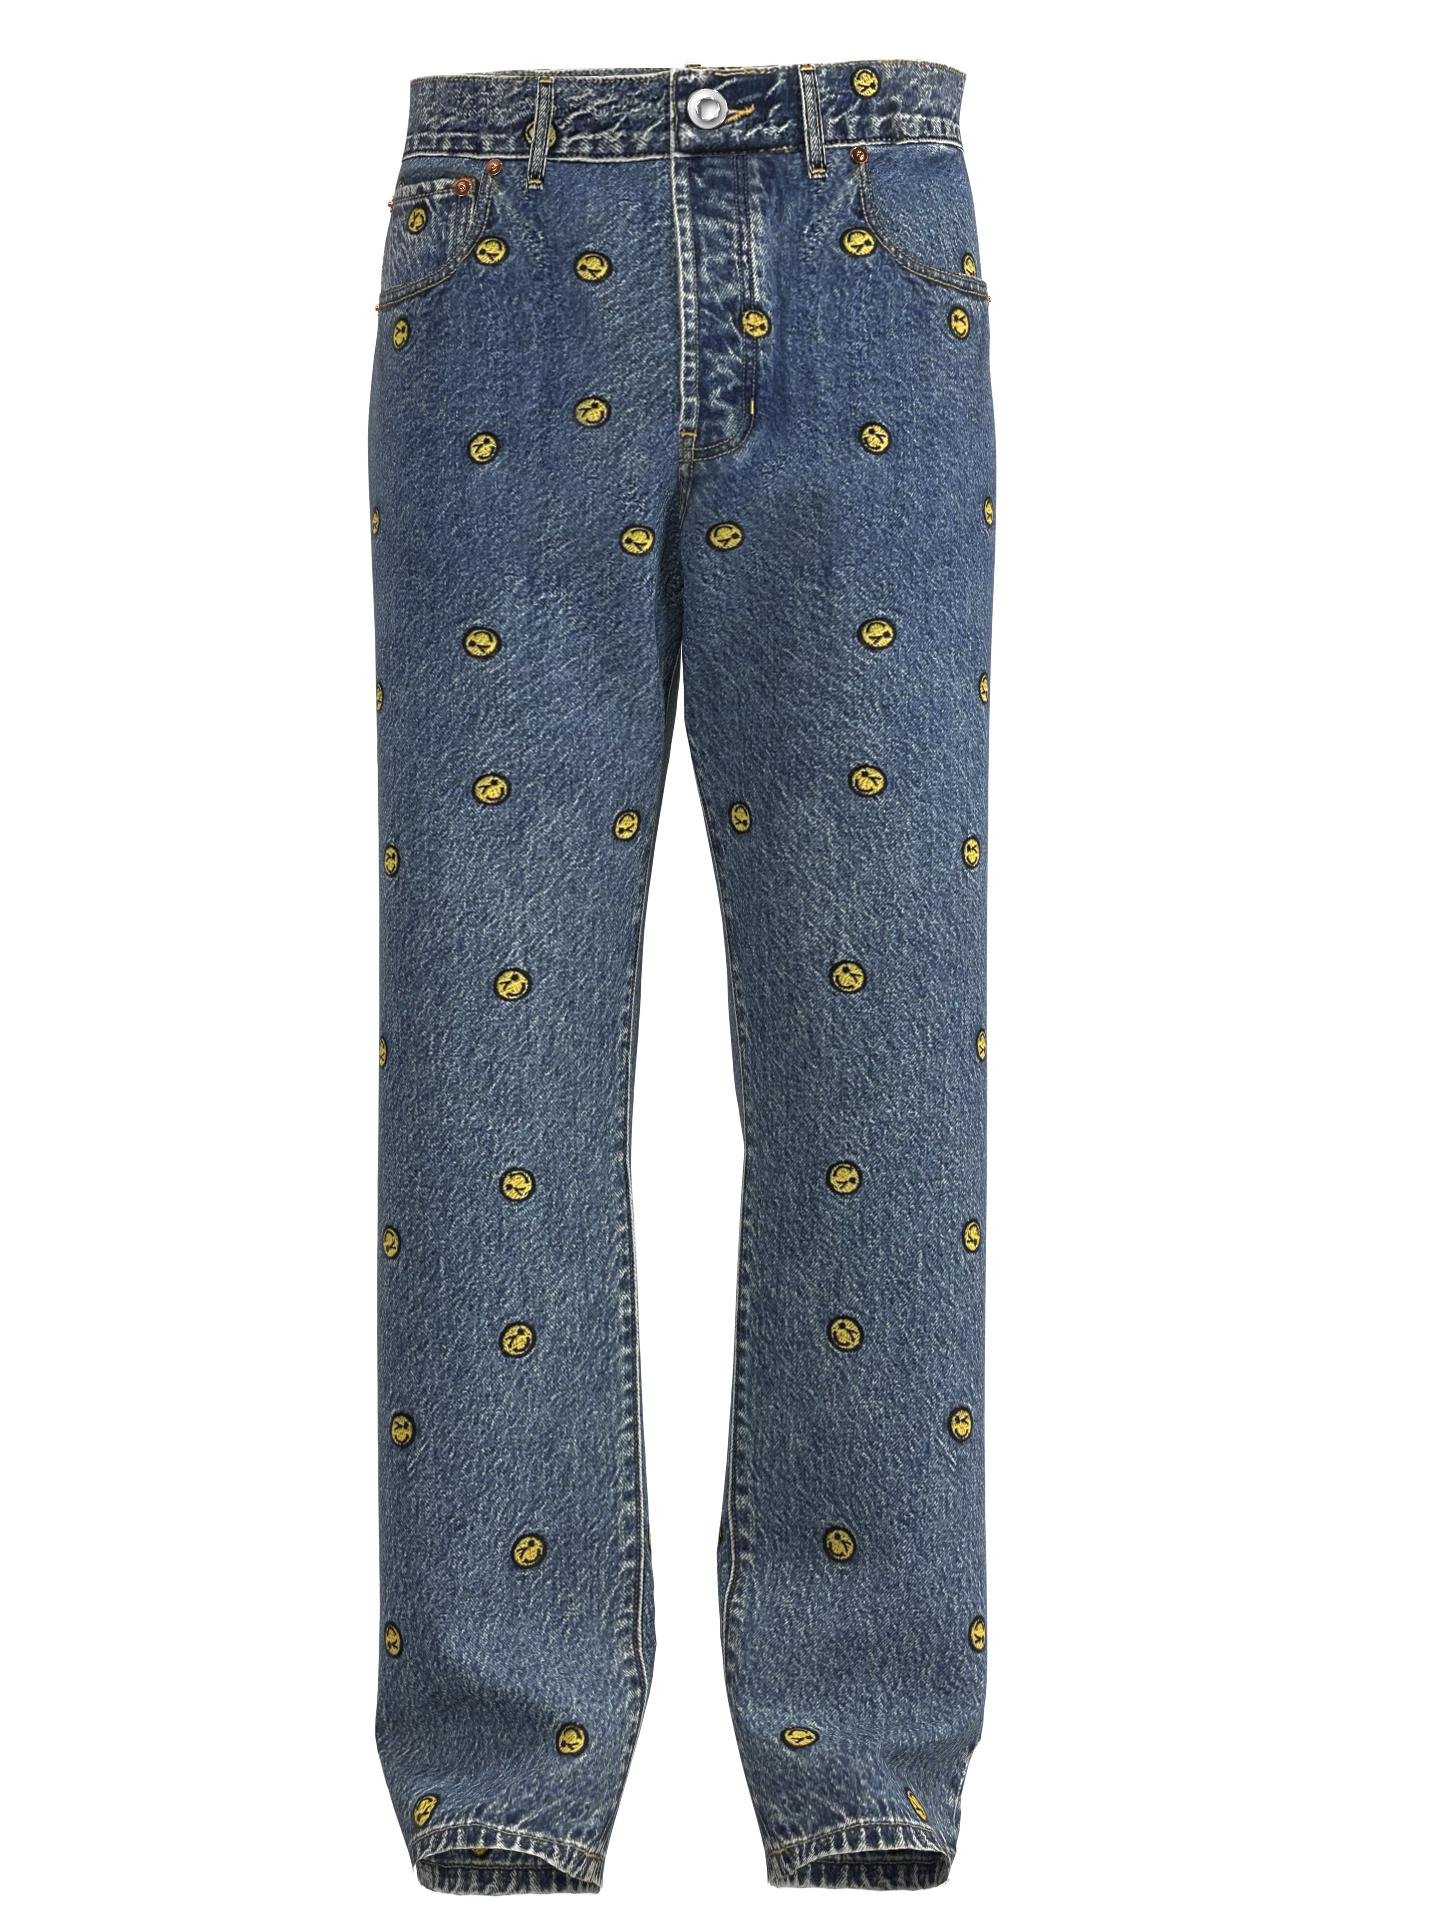 Pacsun Smiley Face Embroidery Jeans by PACSUN